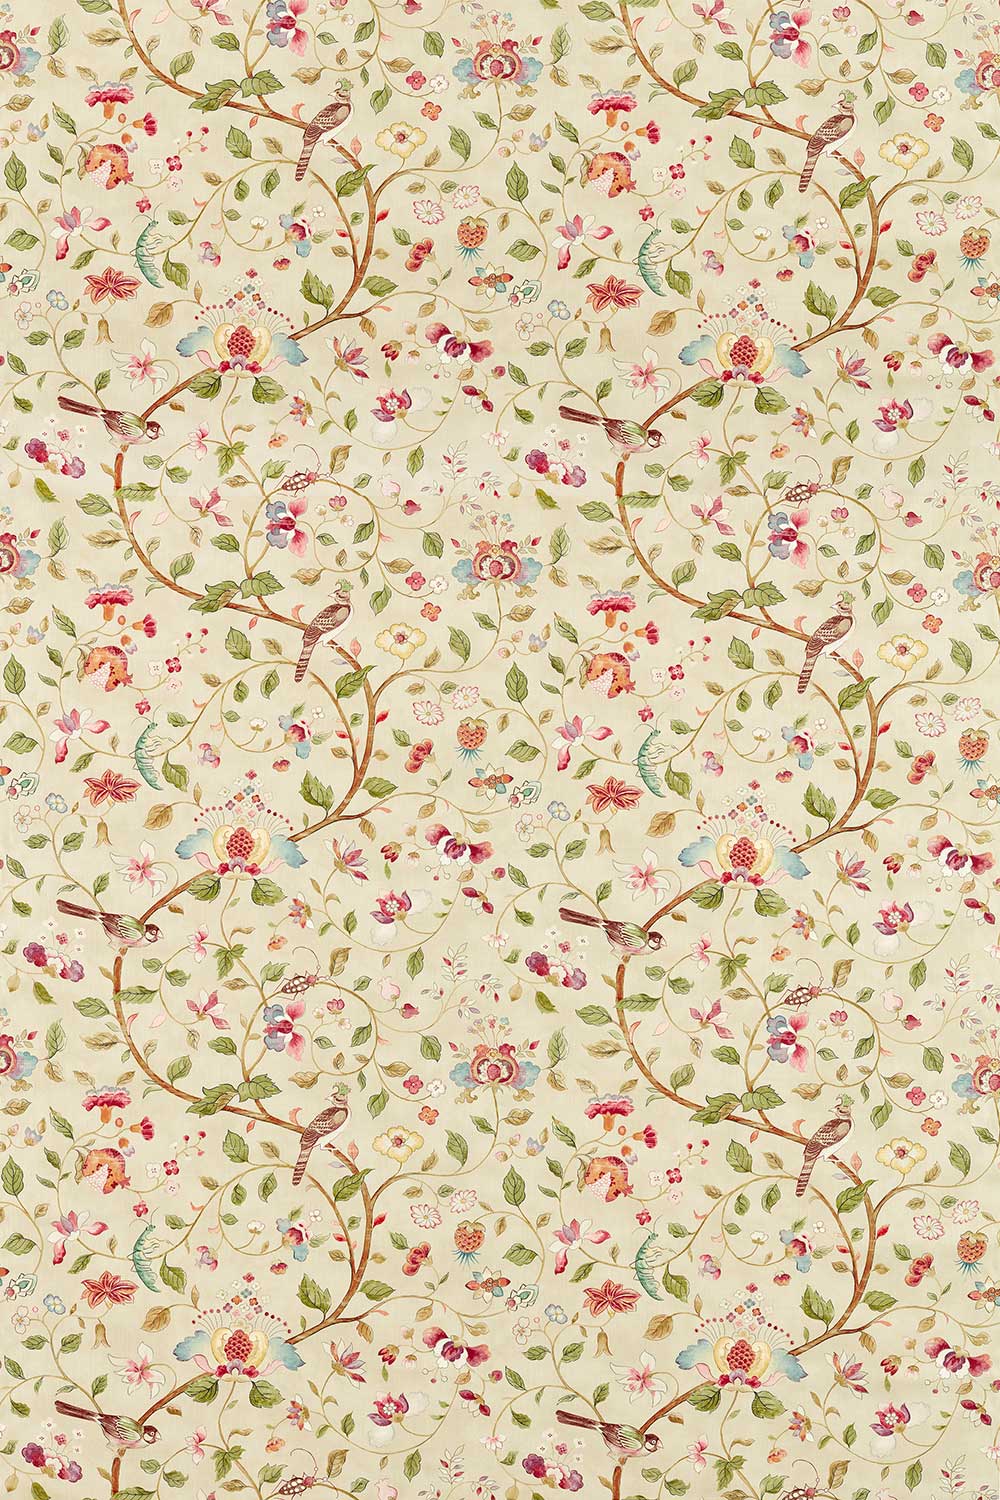 Arils Garden Fabric - Olive / Mulberry - by Sanderson